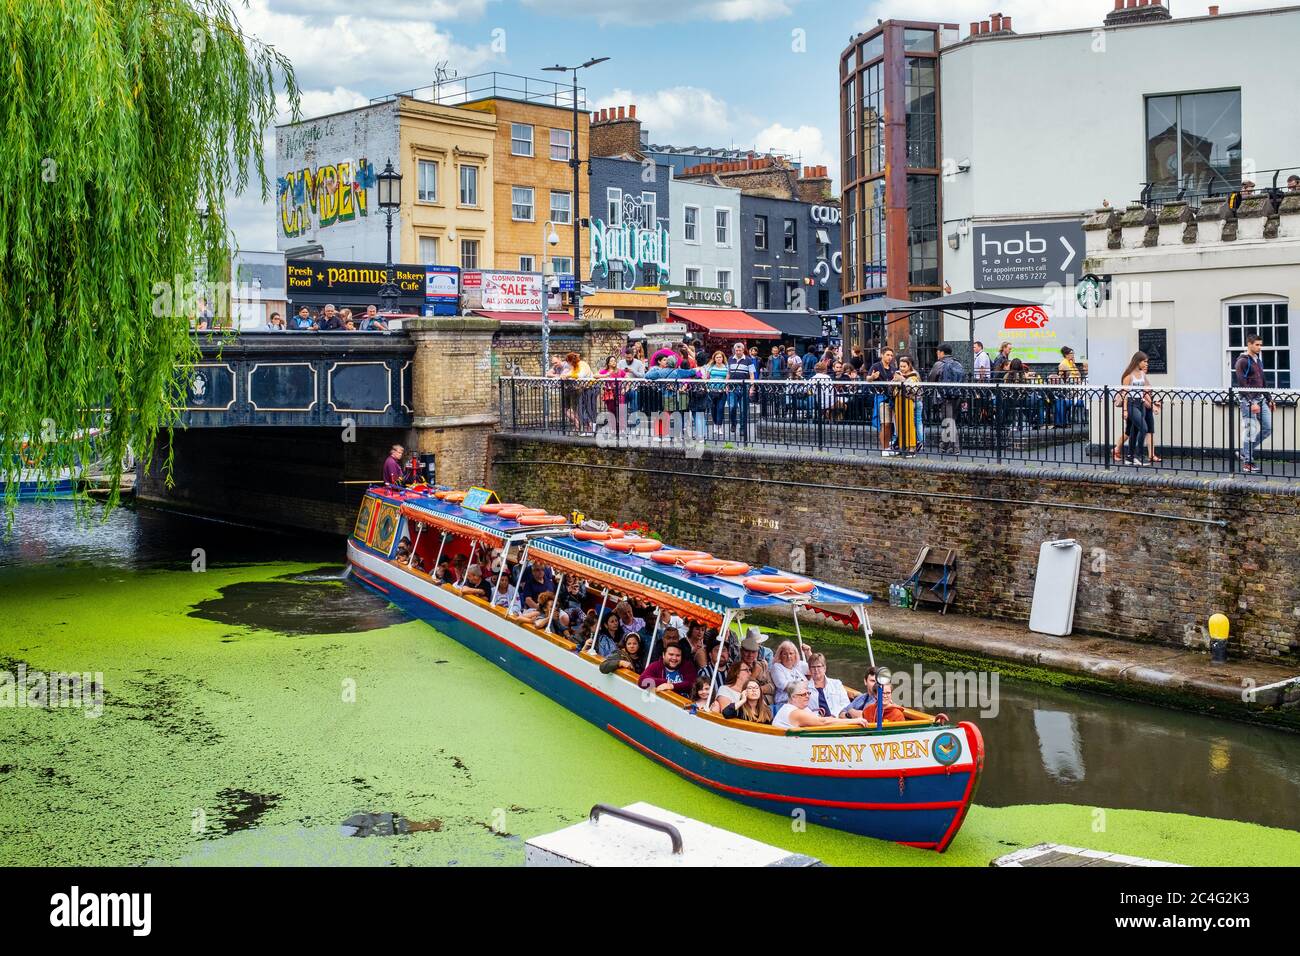 Colorful boat on the Regent's Canal in Camden Town with a view of Camden Market Stock Photo